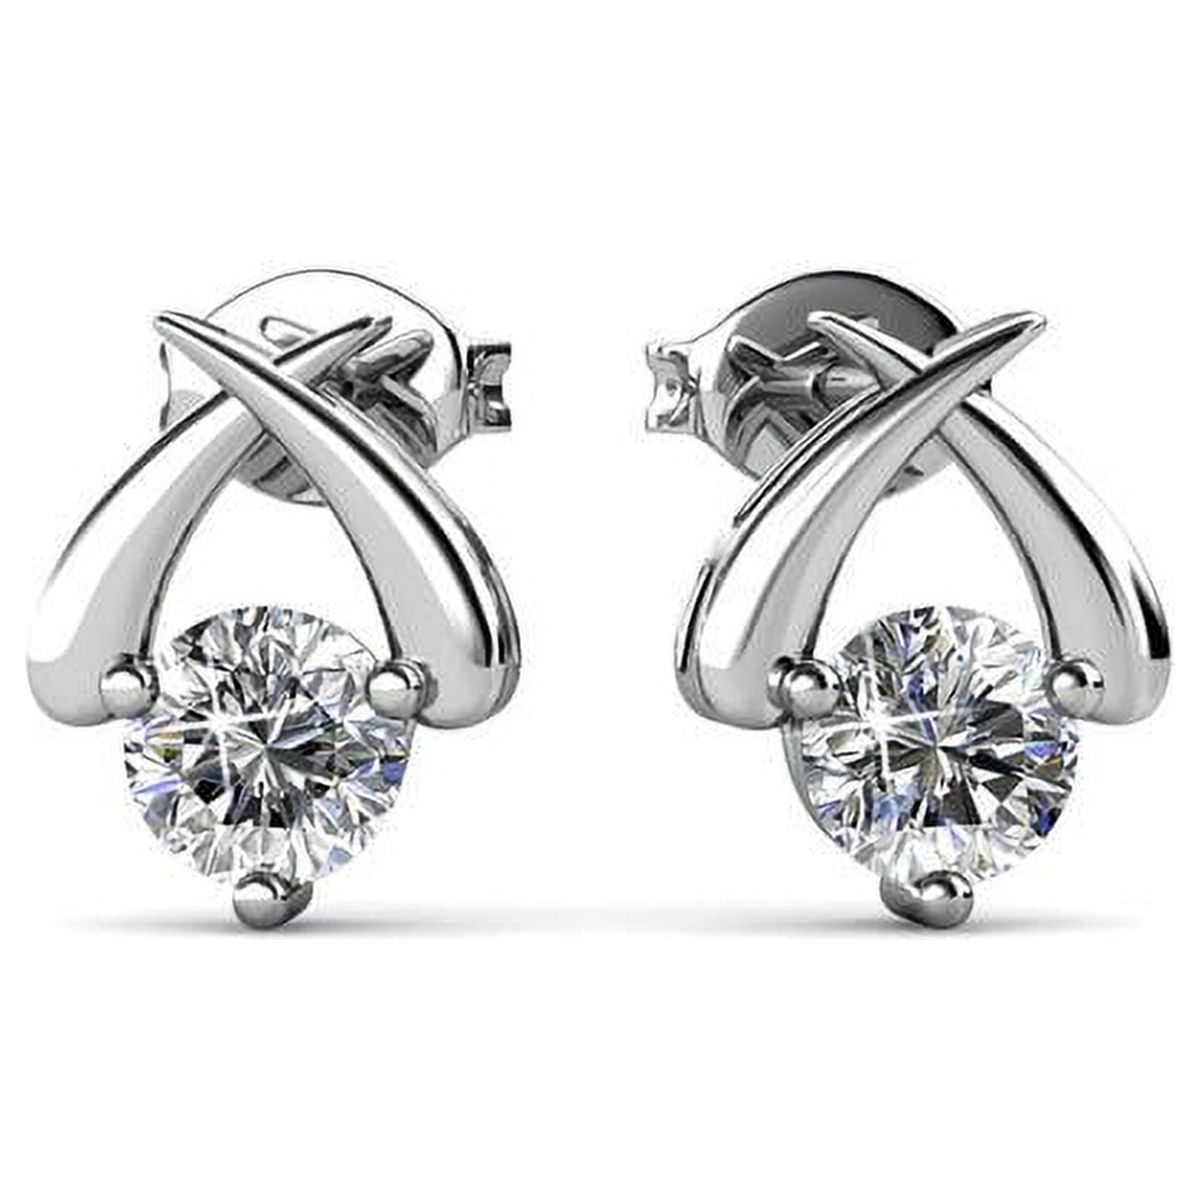 Cate & Chloe Eloise Modest Unique White Gold Stud Halo Earrings, 18k White Gold Plated Studs with Swarovski Crystals, Geometric Stud Earring Set Solitaire Round Cut Crystals - image 1 of 5